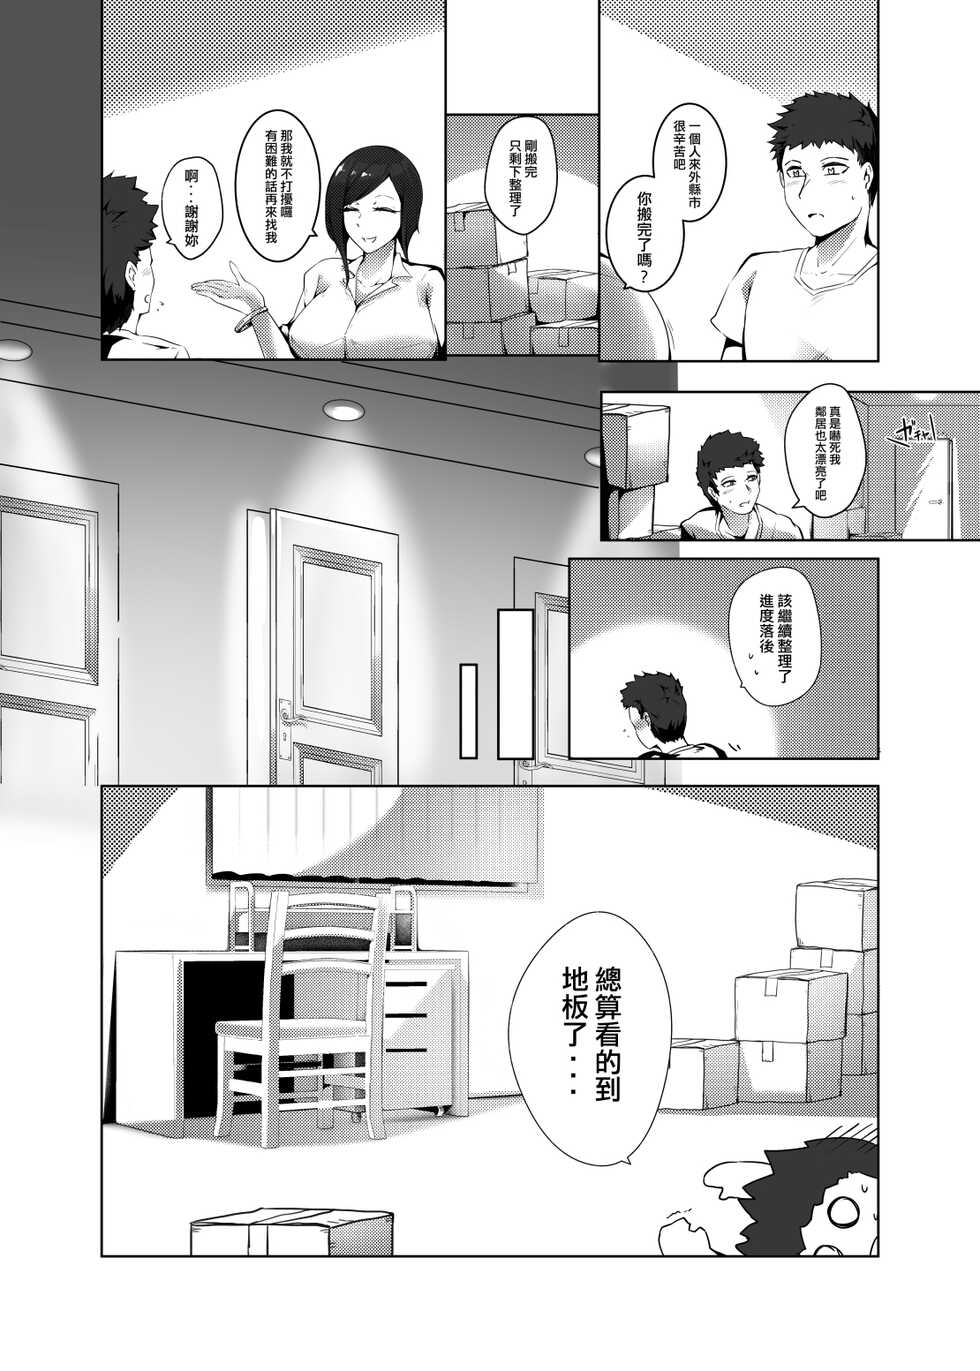 [Pencilbox] FF40 Original Version - The elder sister next door who loves to take care of others - Page 5